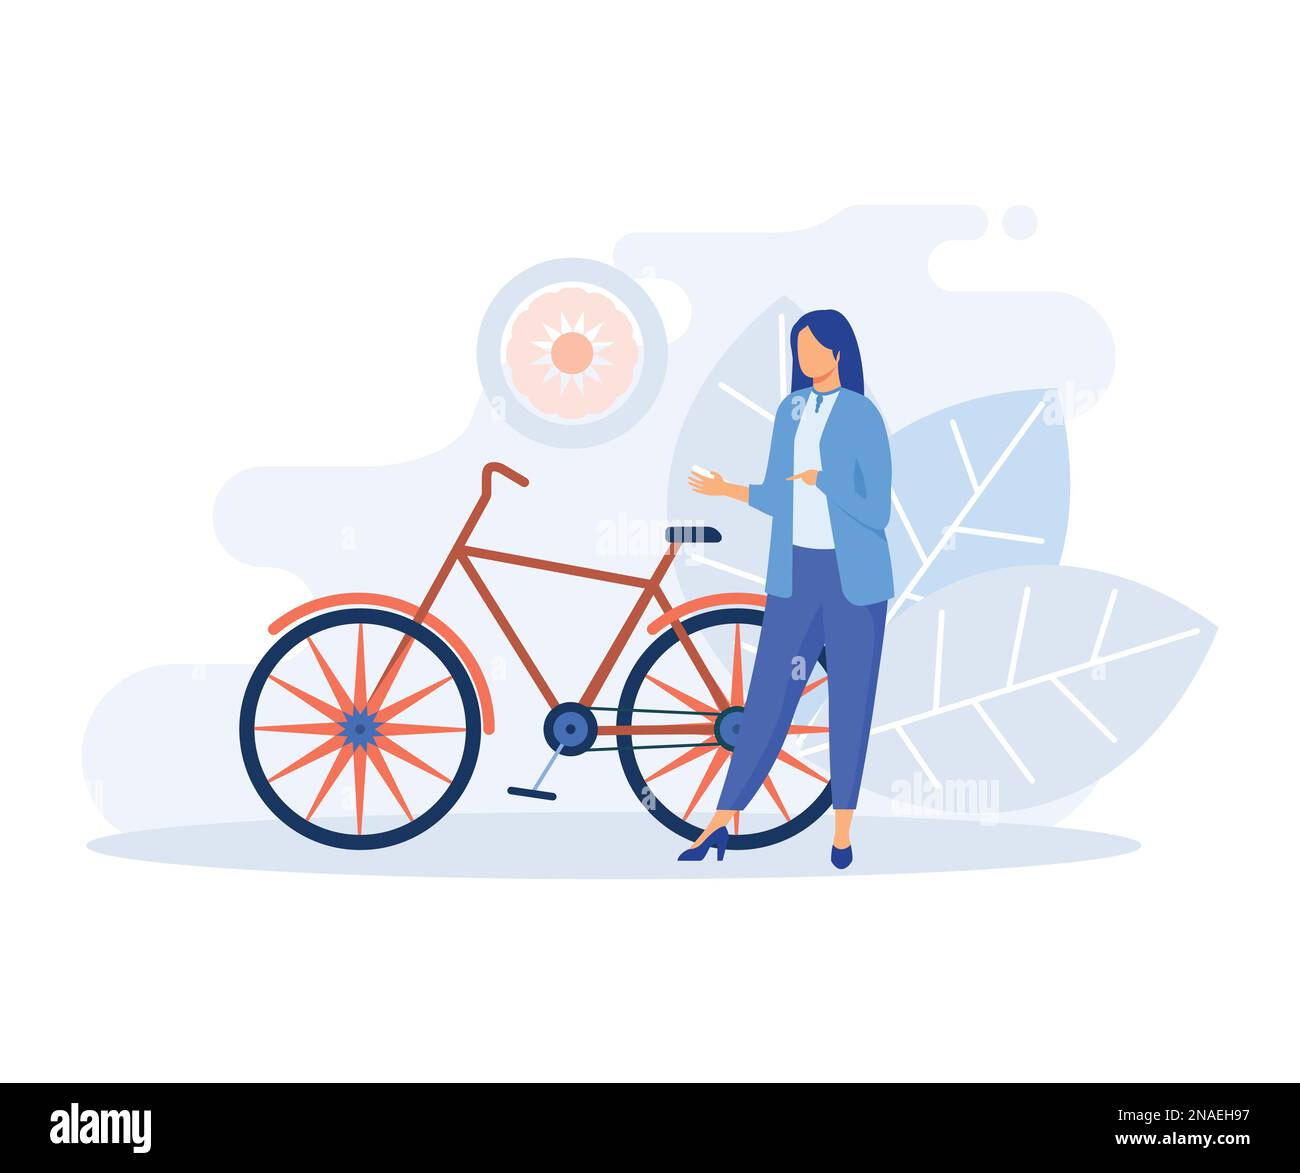 Sustainable transportation illustration. Characters standing near private electric car, e-bike and public bus. Environmental friendly transport concep Stock Vector